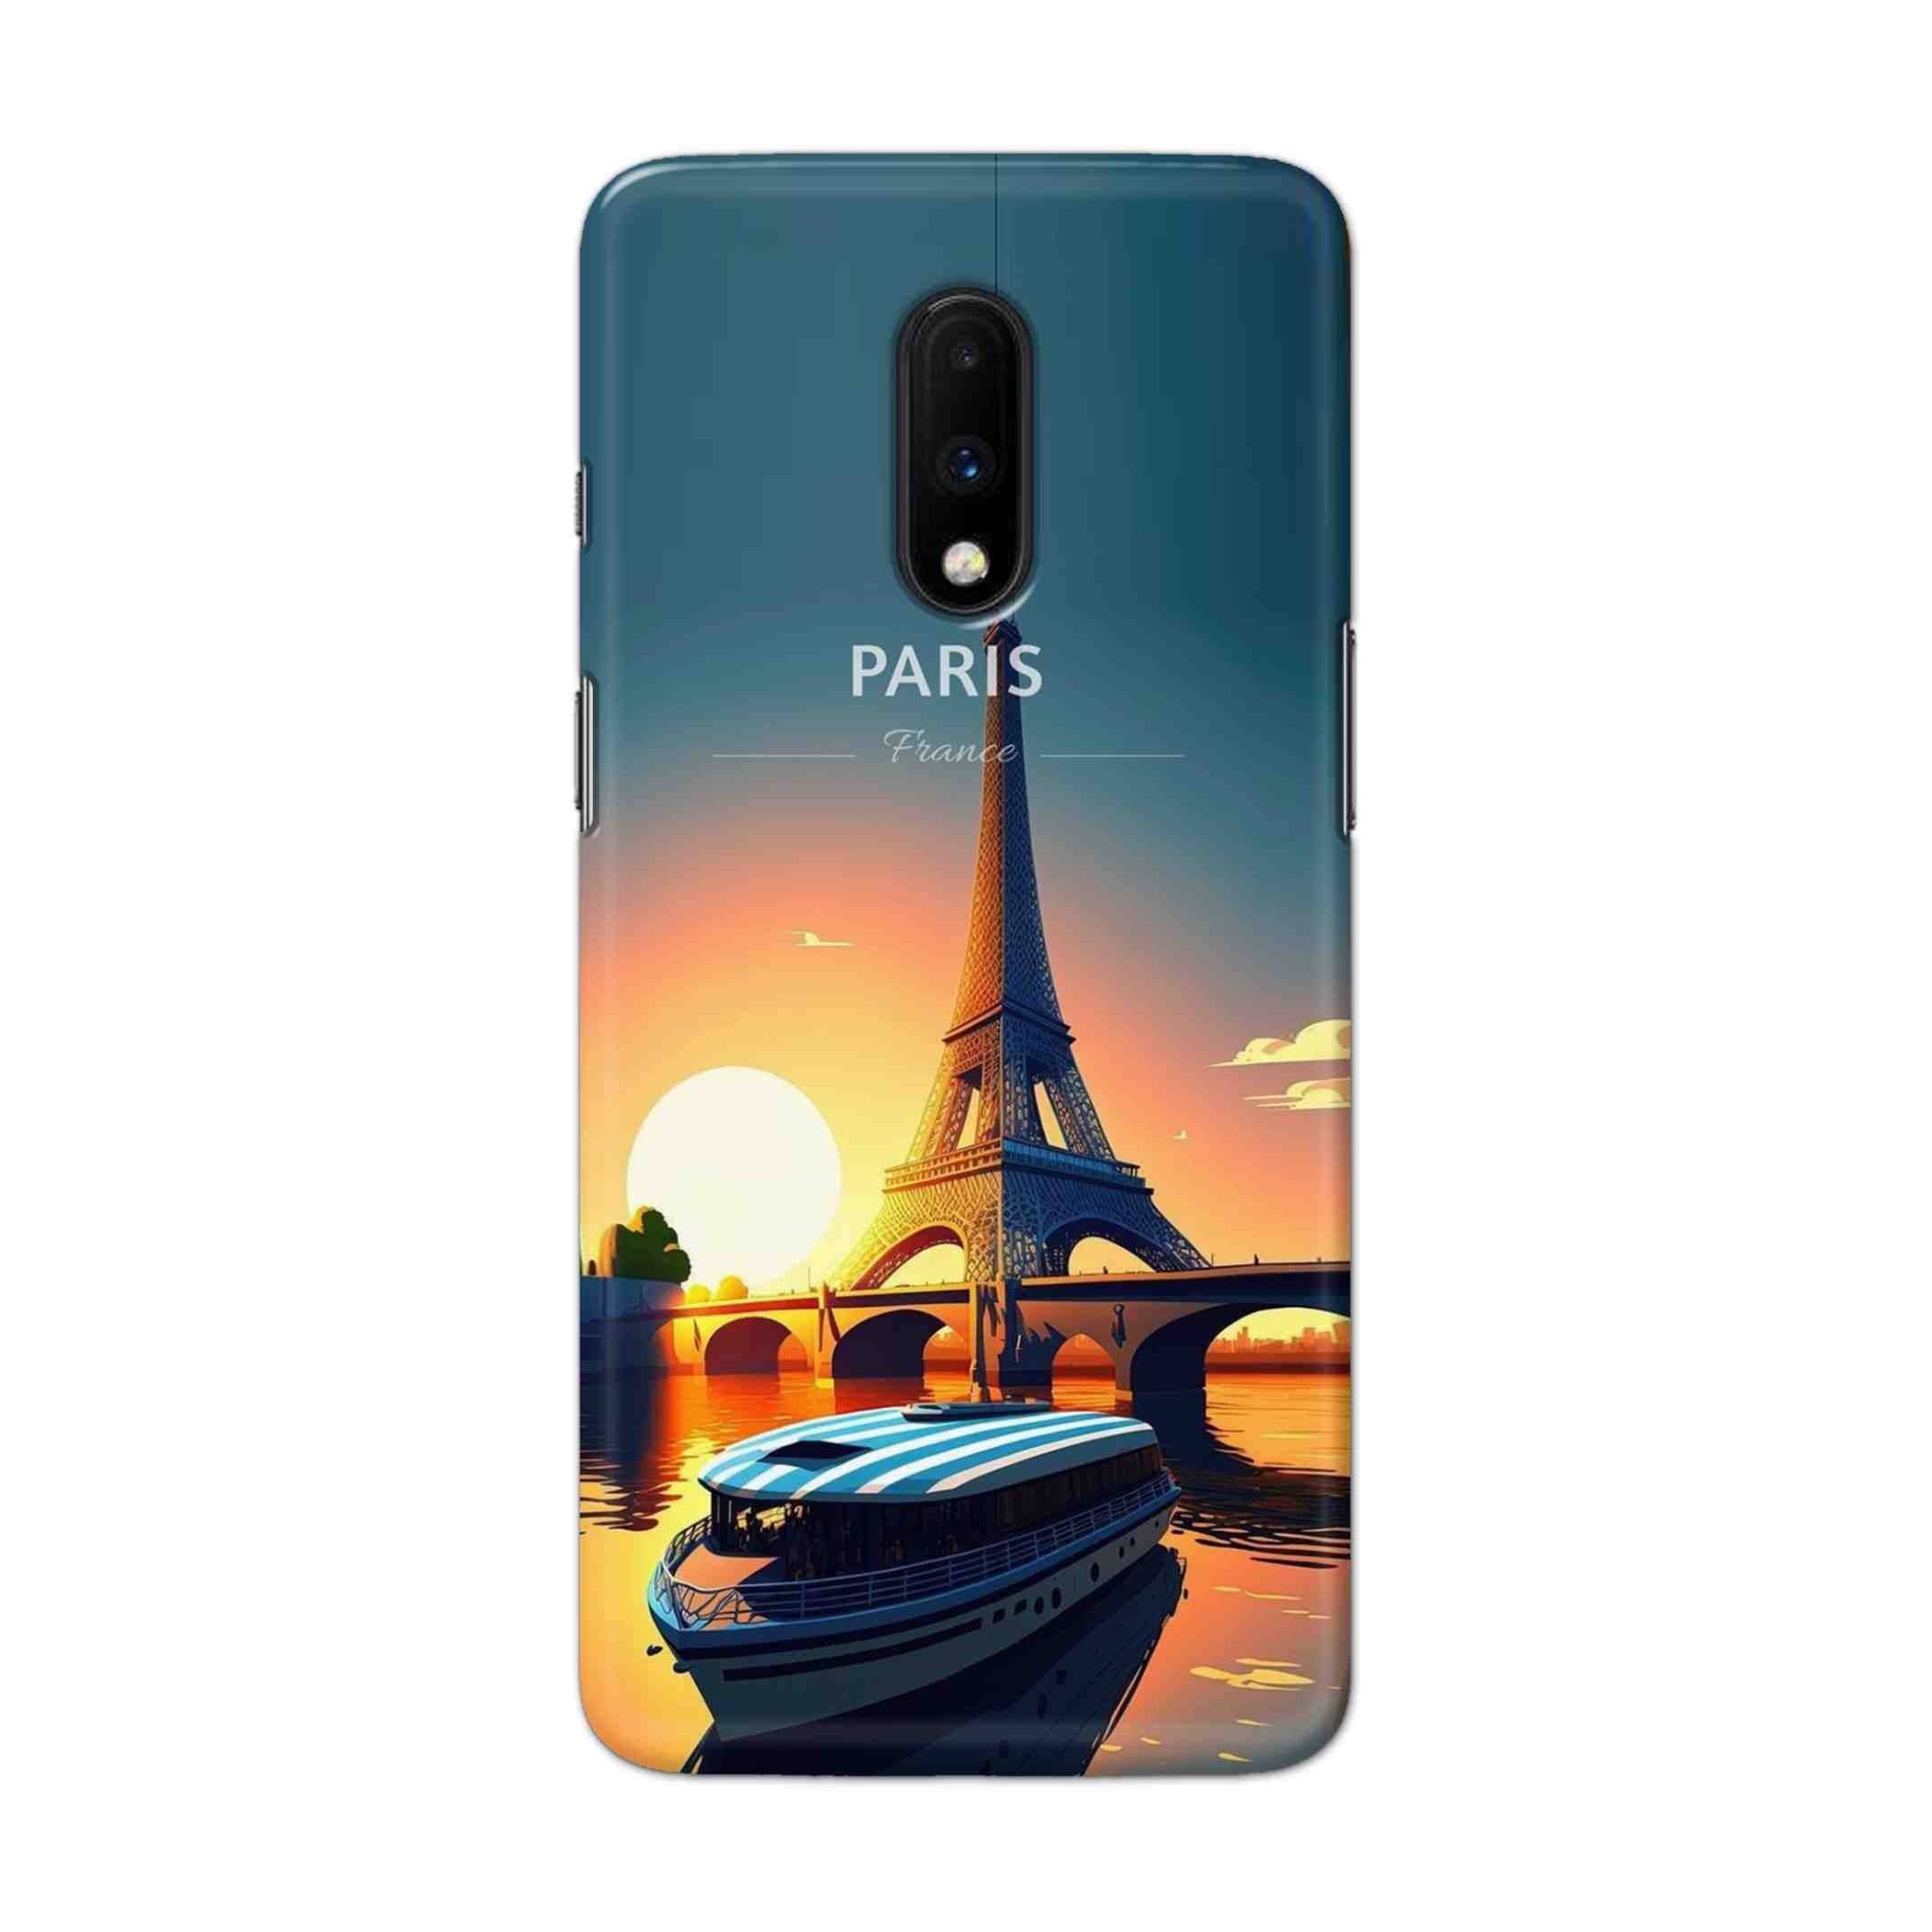 Buy France Hard Back Mobile Phone Case Cover For OnePlus 7 Online